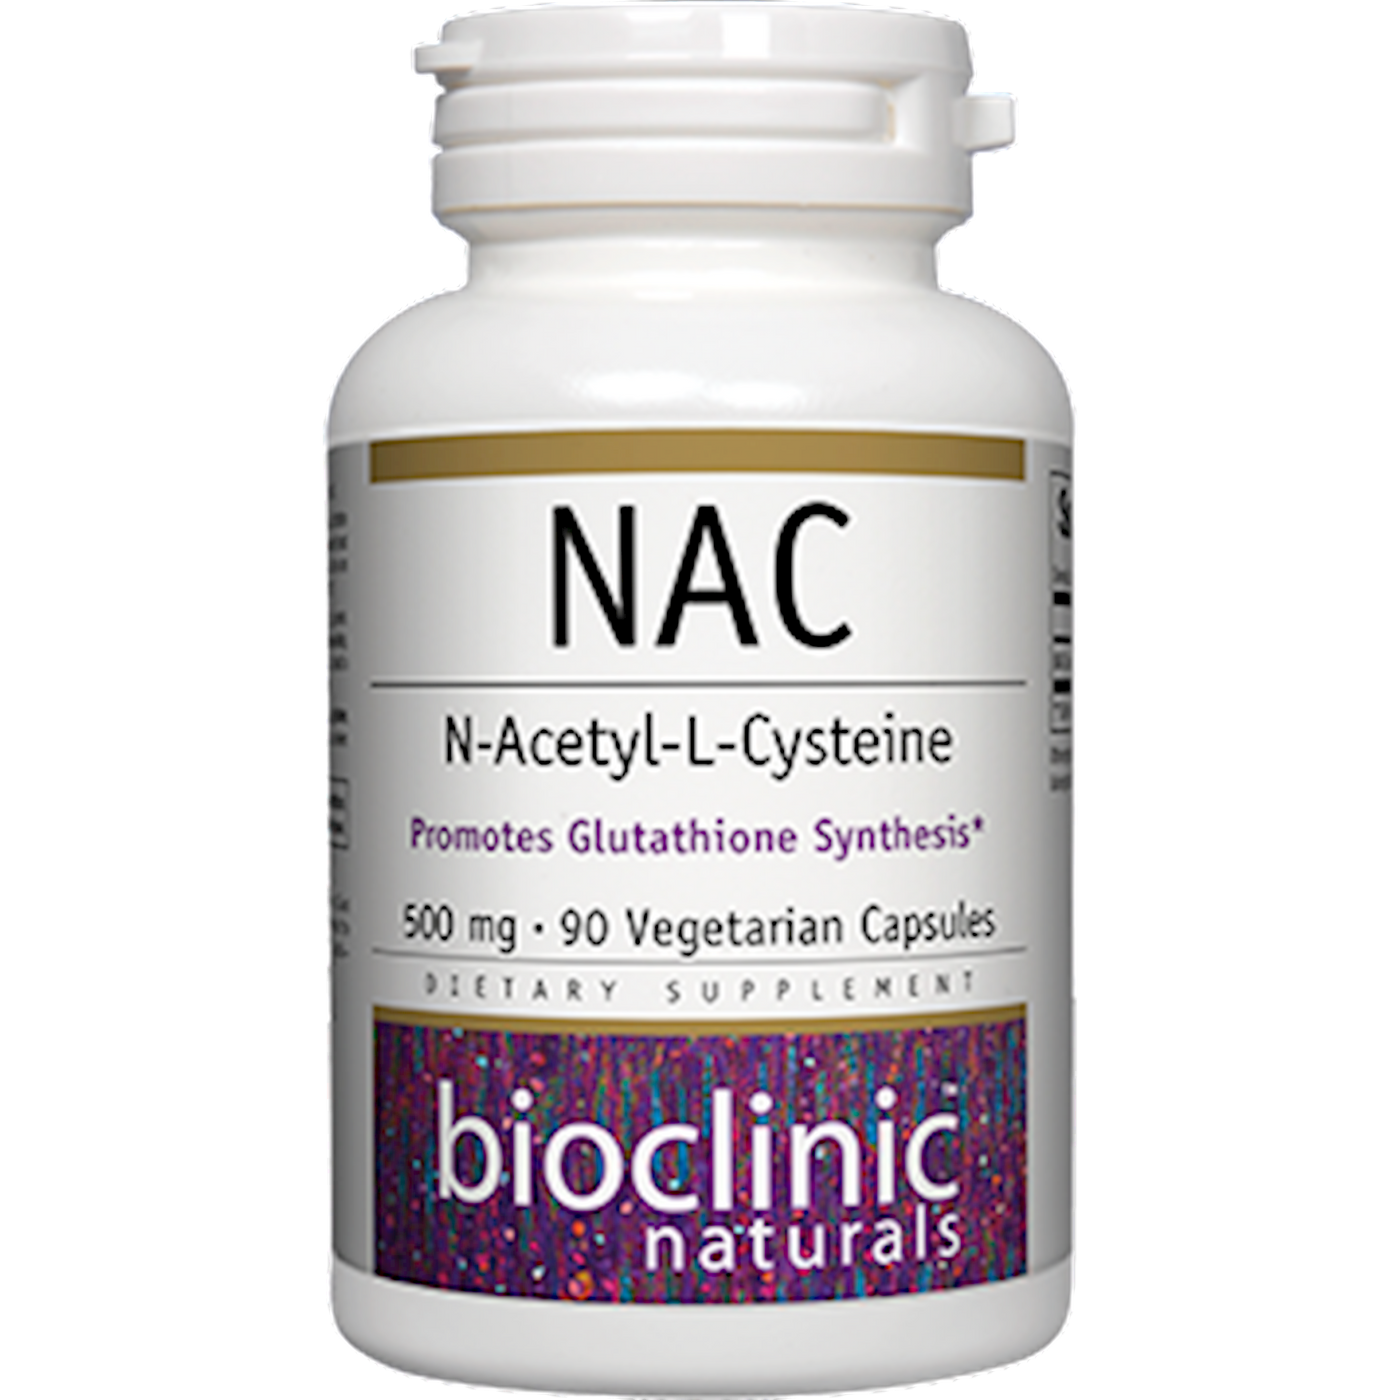 NAC 500mg 90 vcaps Curated Wellness